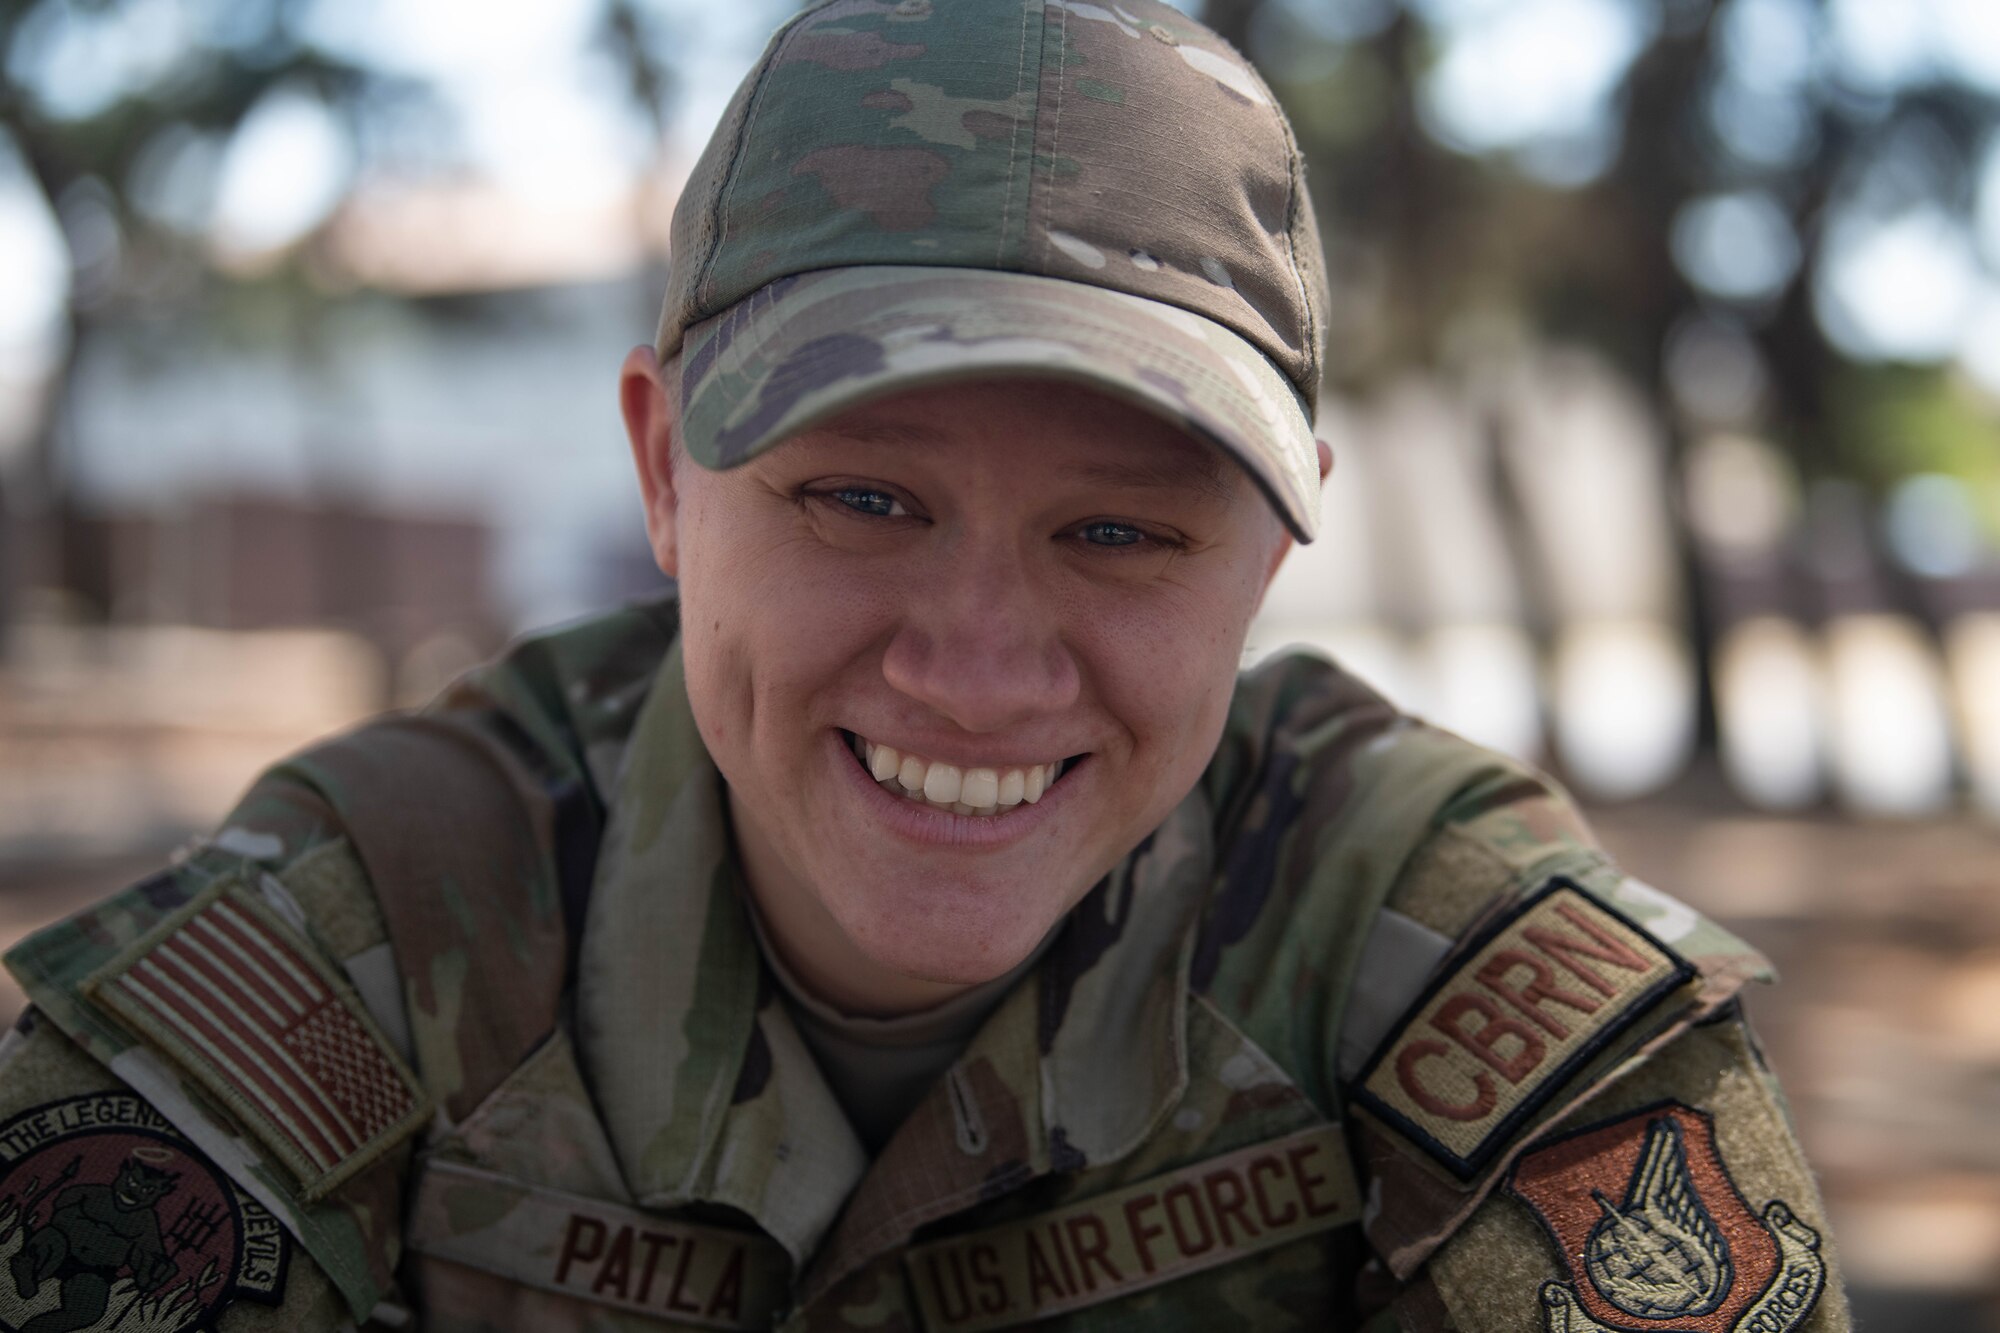 A military member smiles for the camera